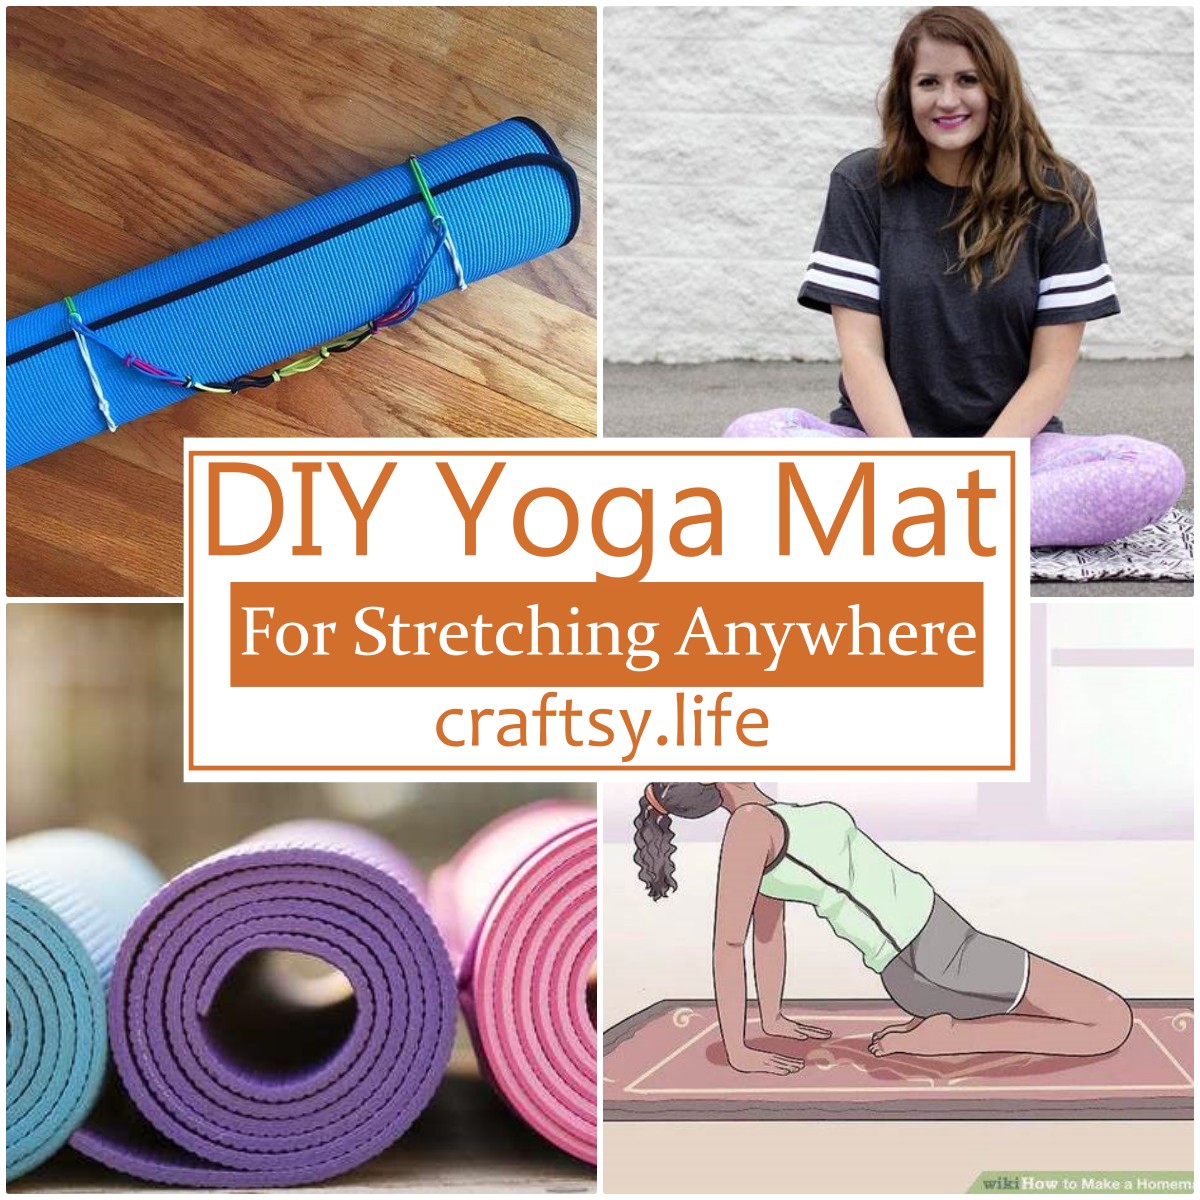 DIY Yoga Mat For Stretching Anywhere